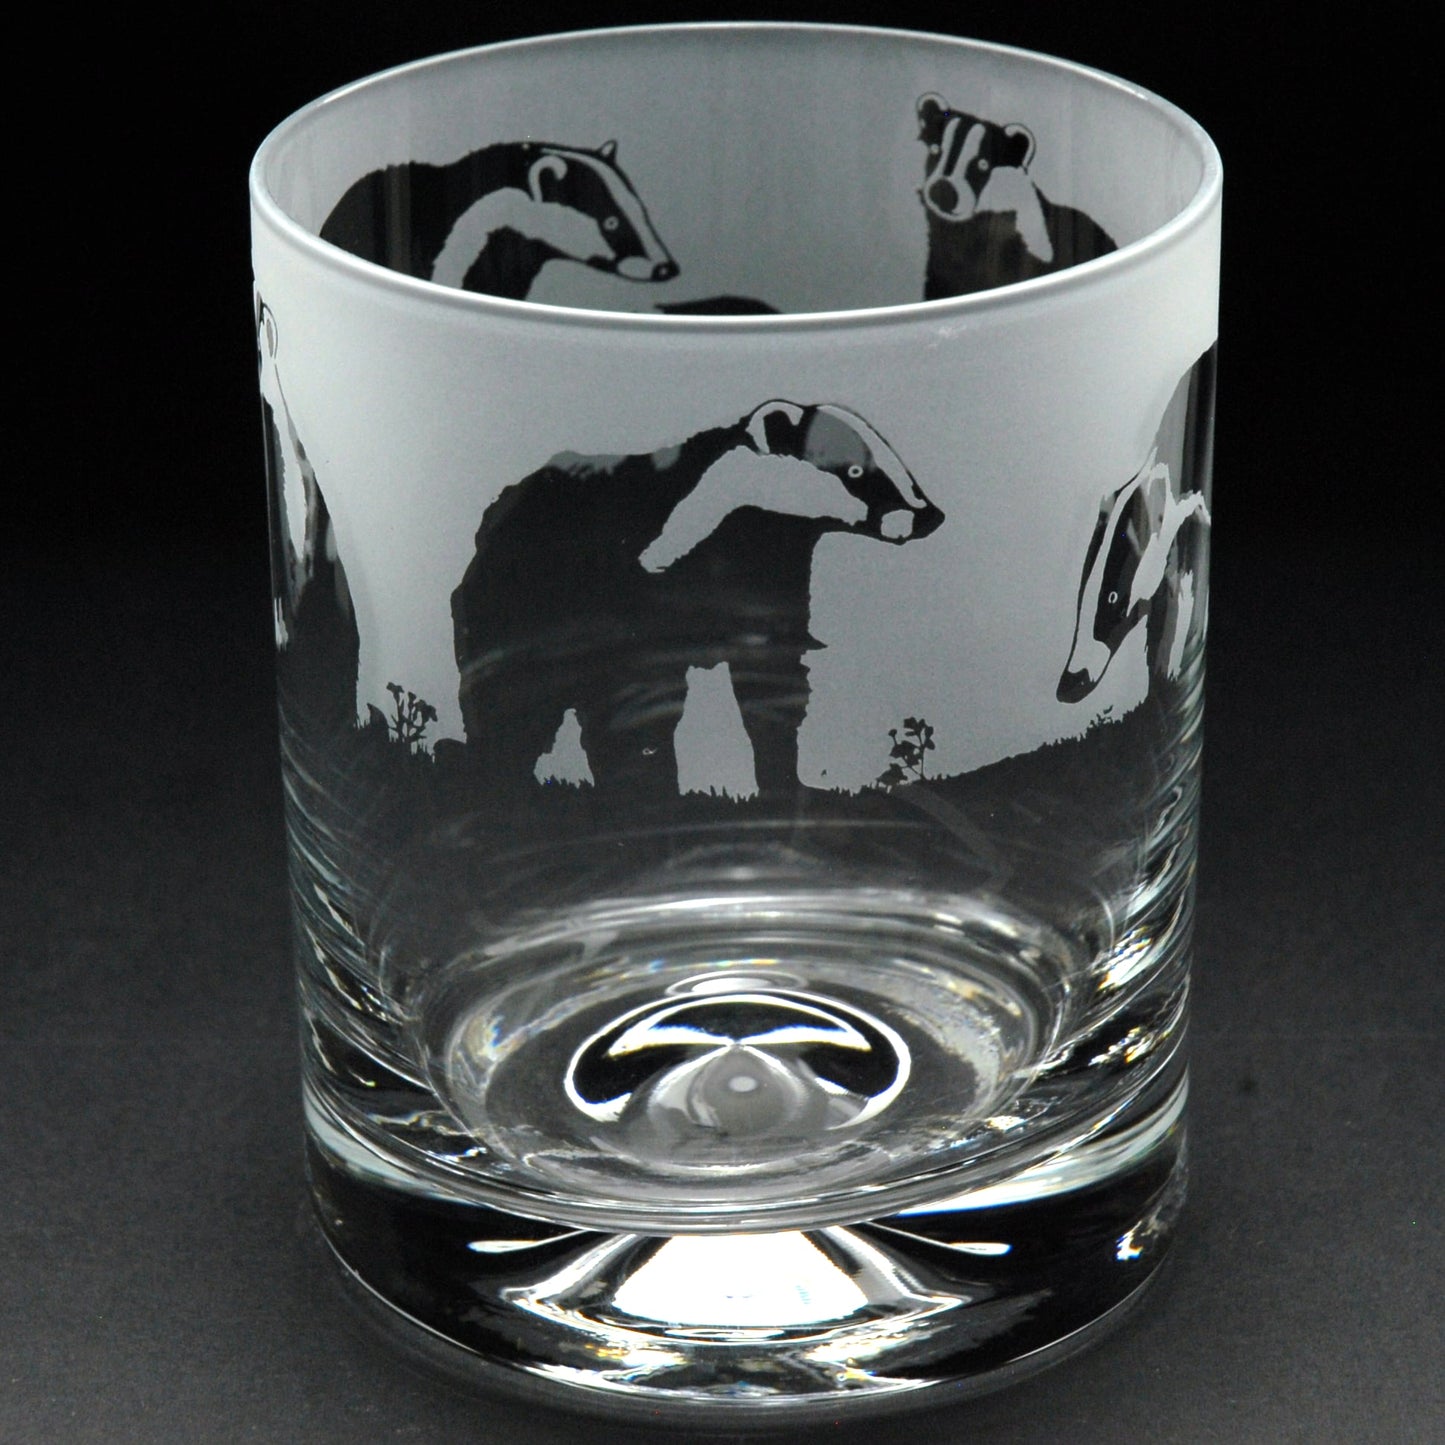 Badger Whiskey Tumbler Glass - Hand Etched/Engraved Gift